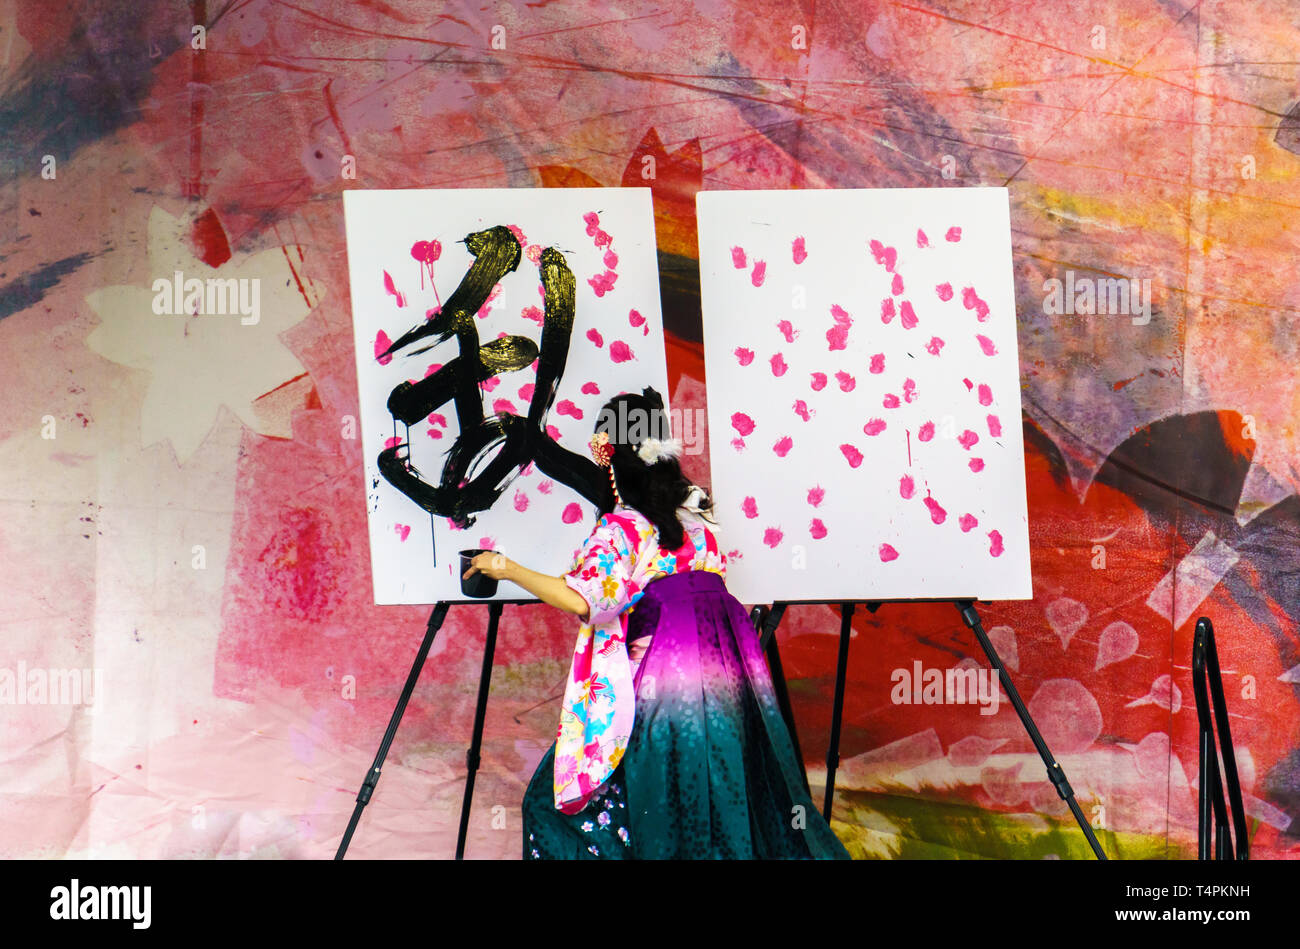 Vancouver, BC / Canada - April 14, 2019: Japanese woman wearing kimono is creating art by painting at Sakura Days Japan Fair, Cherry Blossom Festival Stock Photo